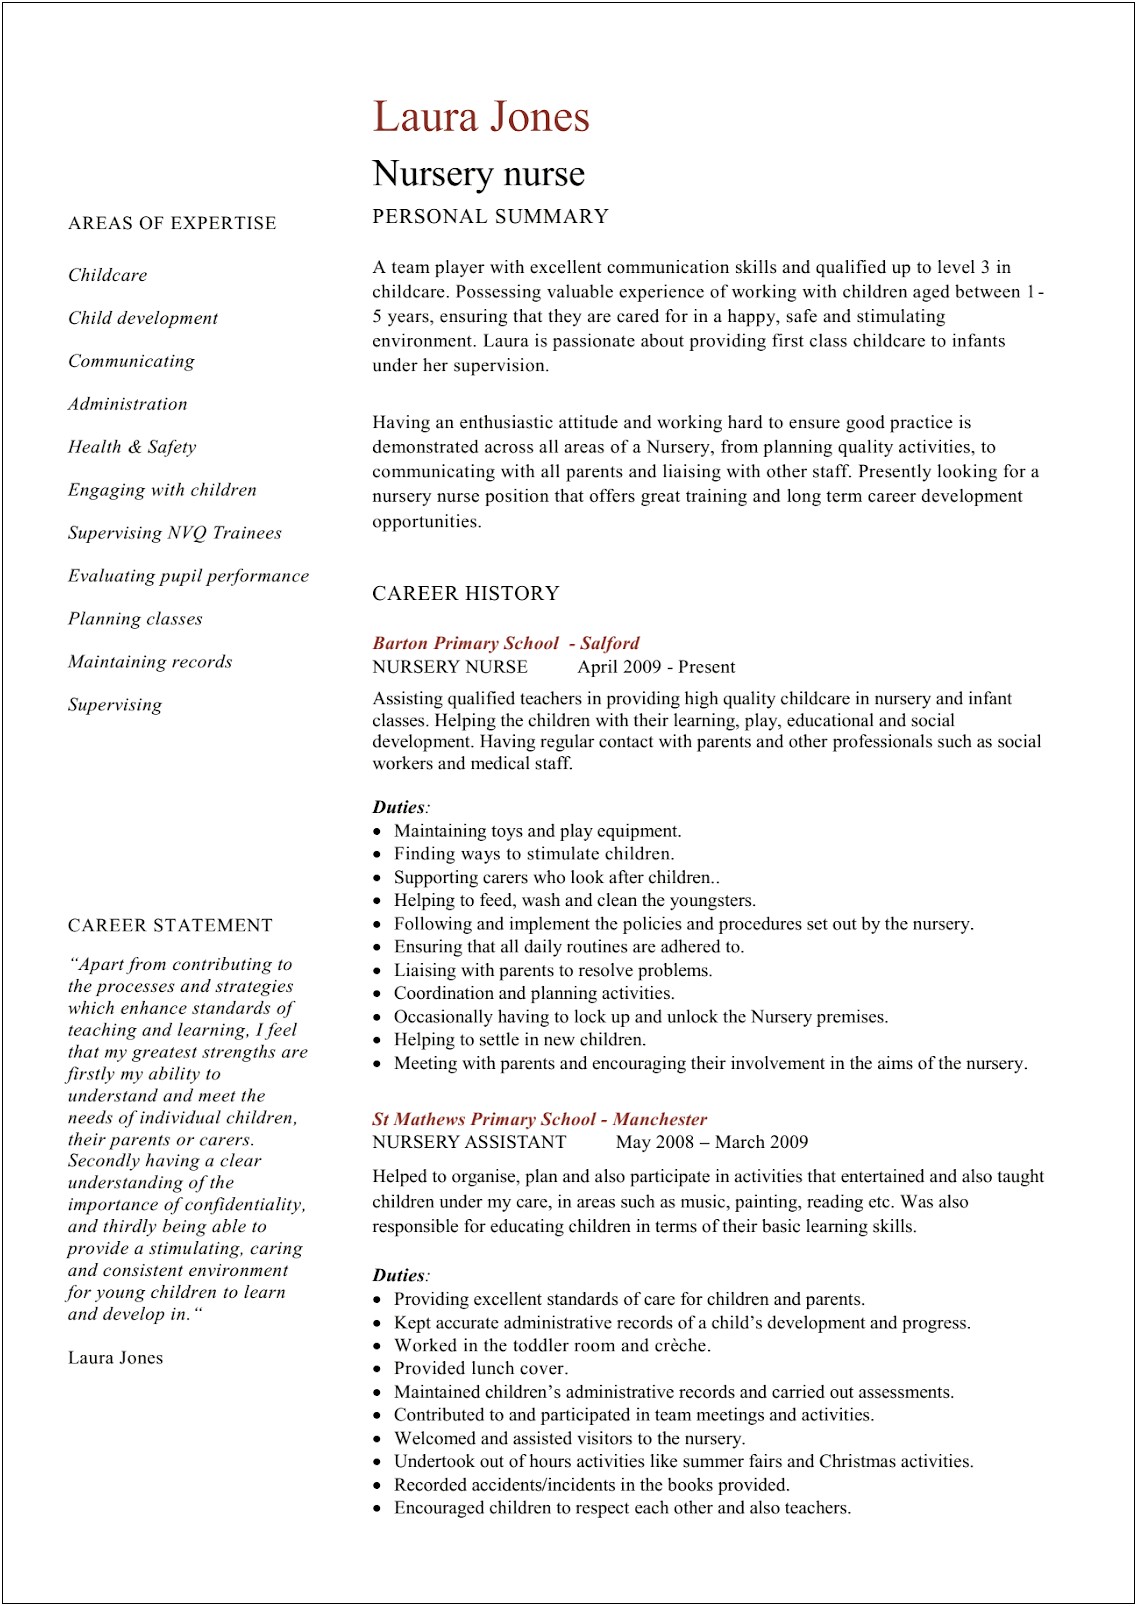 Cover Letter And Resume Examples Recruiters